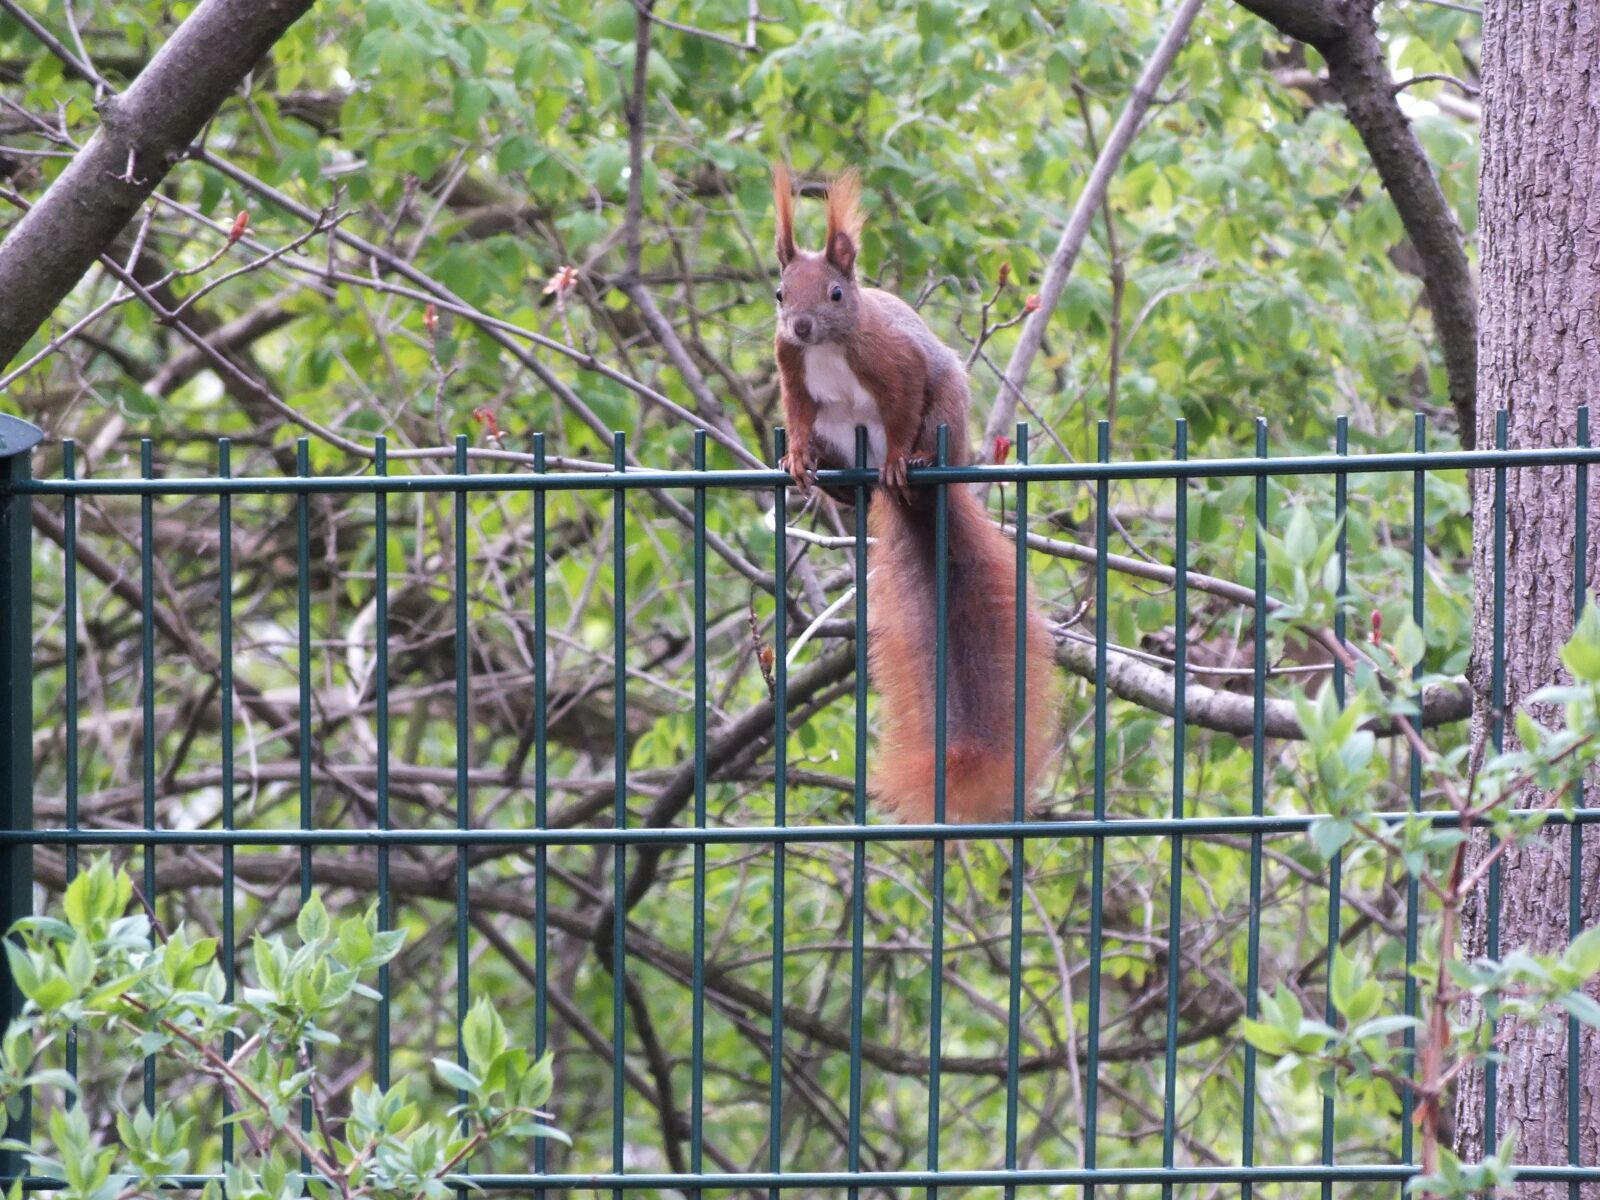 FujiFilm FinePix HS20 EXR (FinePix HS22 EXR) sample photo. Squirrel, fence, nature photography